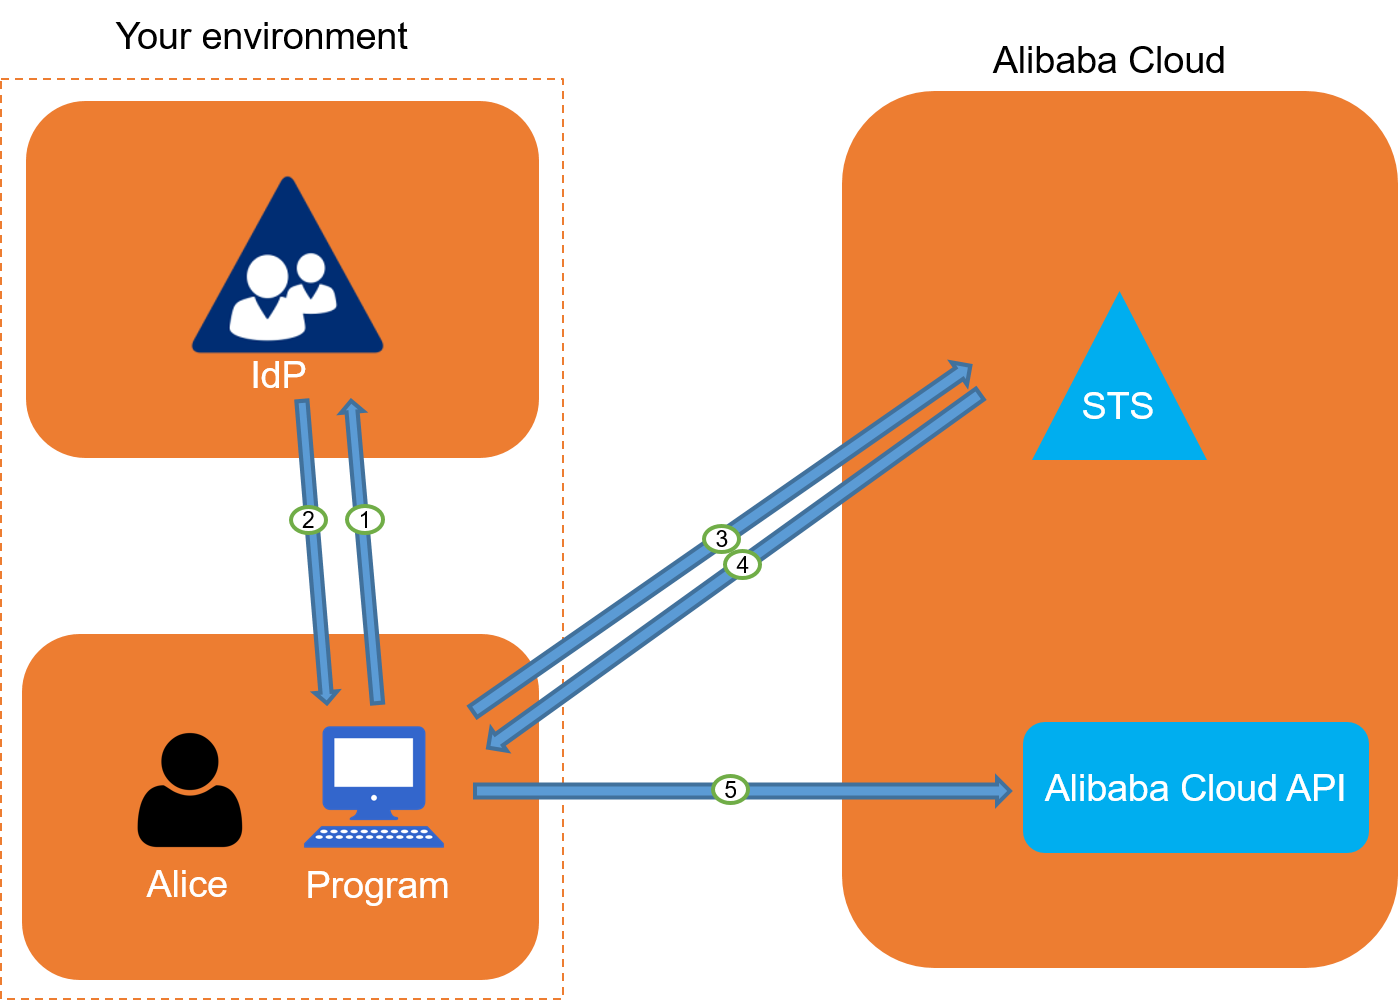 Access Alibaba Cloud by using a program